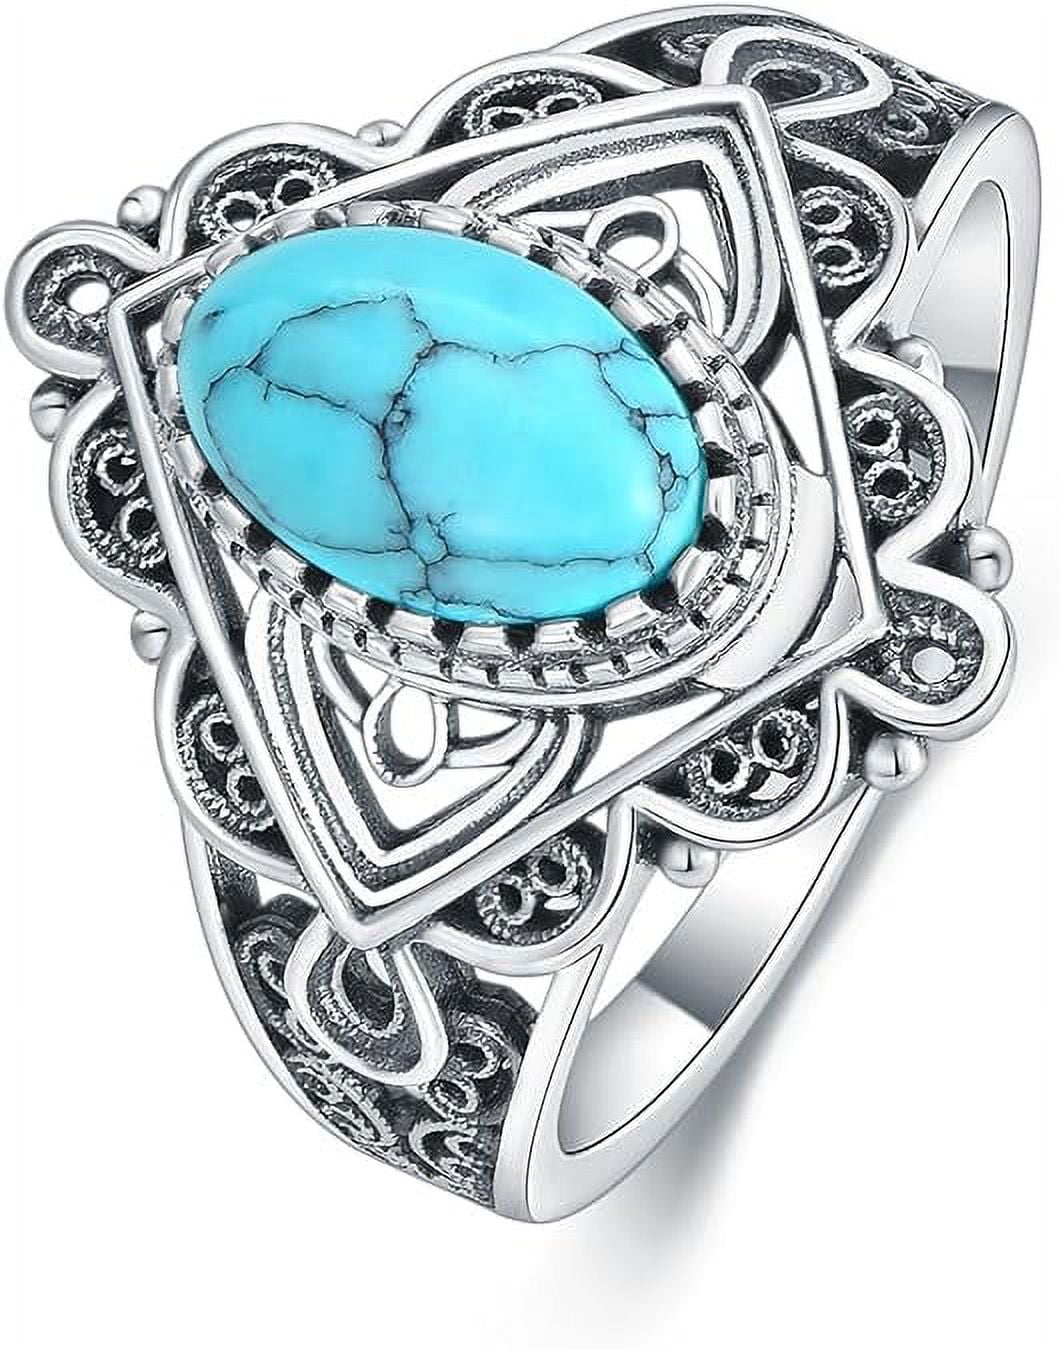 amousa Ladies Turquoise Ring Ring Bride Engagement Wedding Rings Band  Anniversary Gift Size 5-10 - Walmart.com